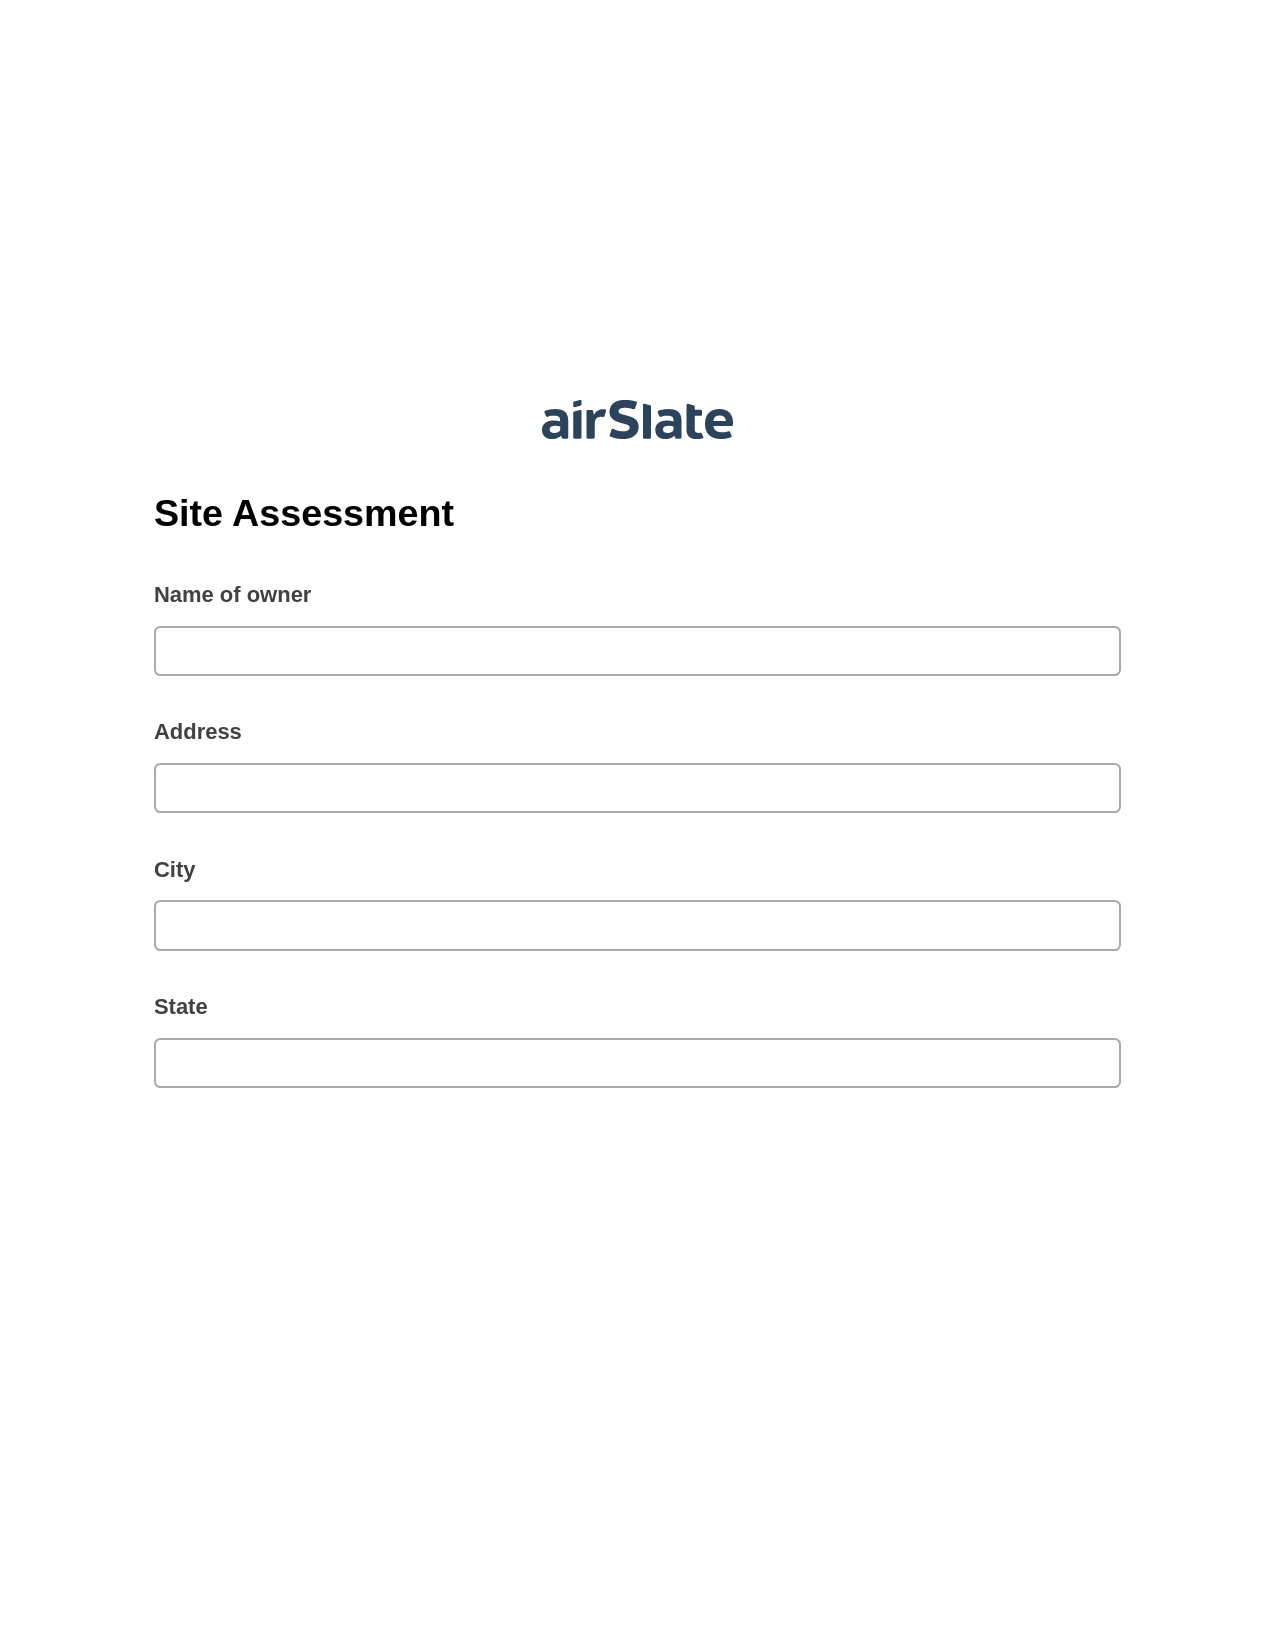 Site Assessment Pre-fill Dropdown from Airtable, System Bot - Create a Slate in another Flow, Google Drive Bot